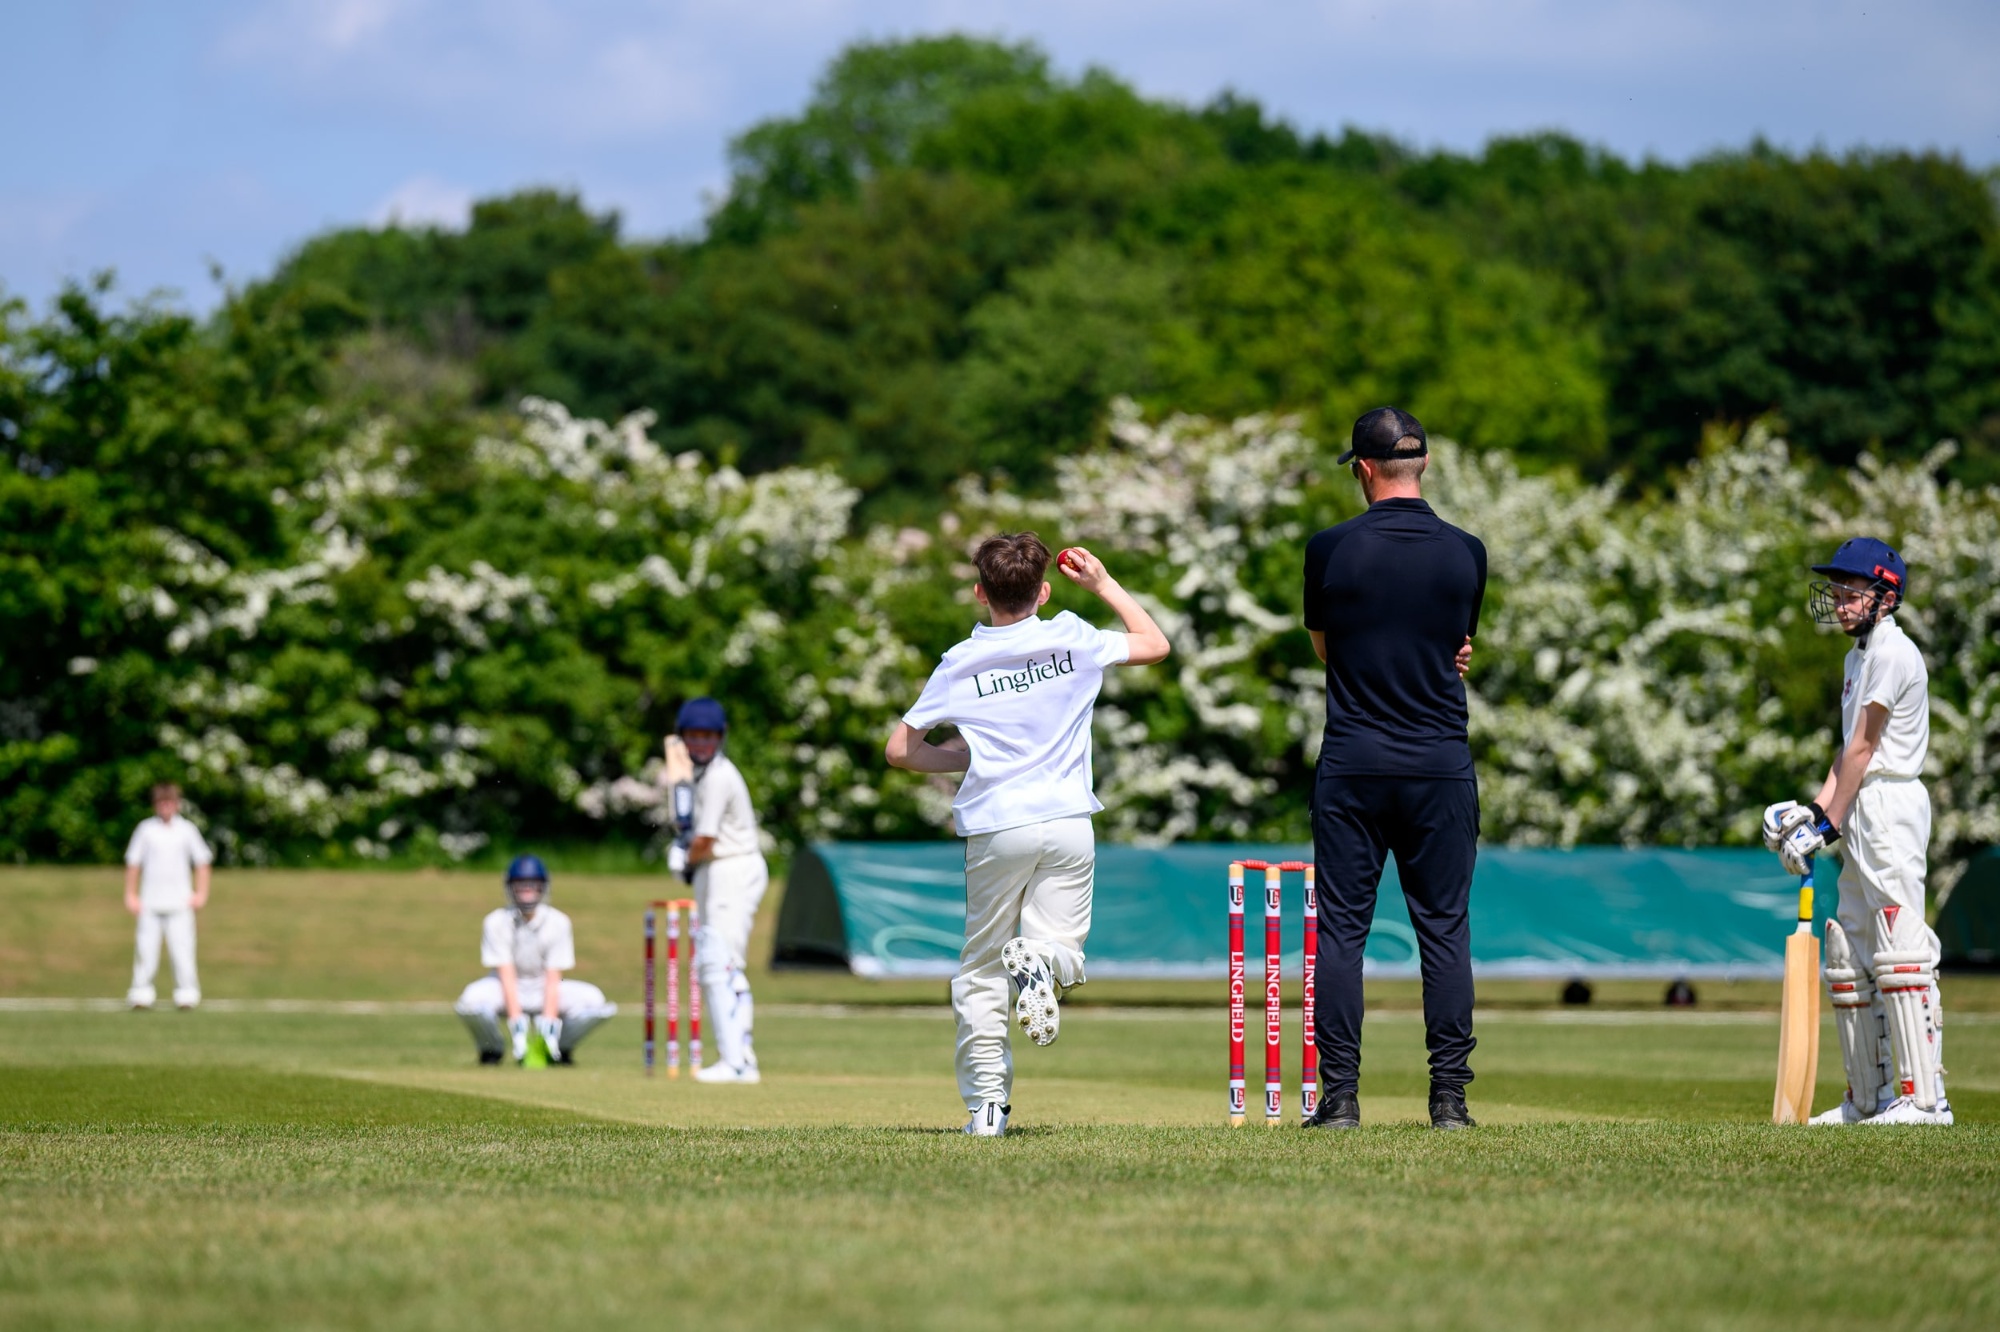 Lingfield student bowling in a cricket match